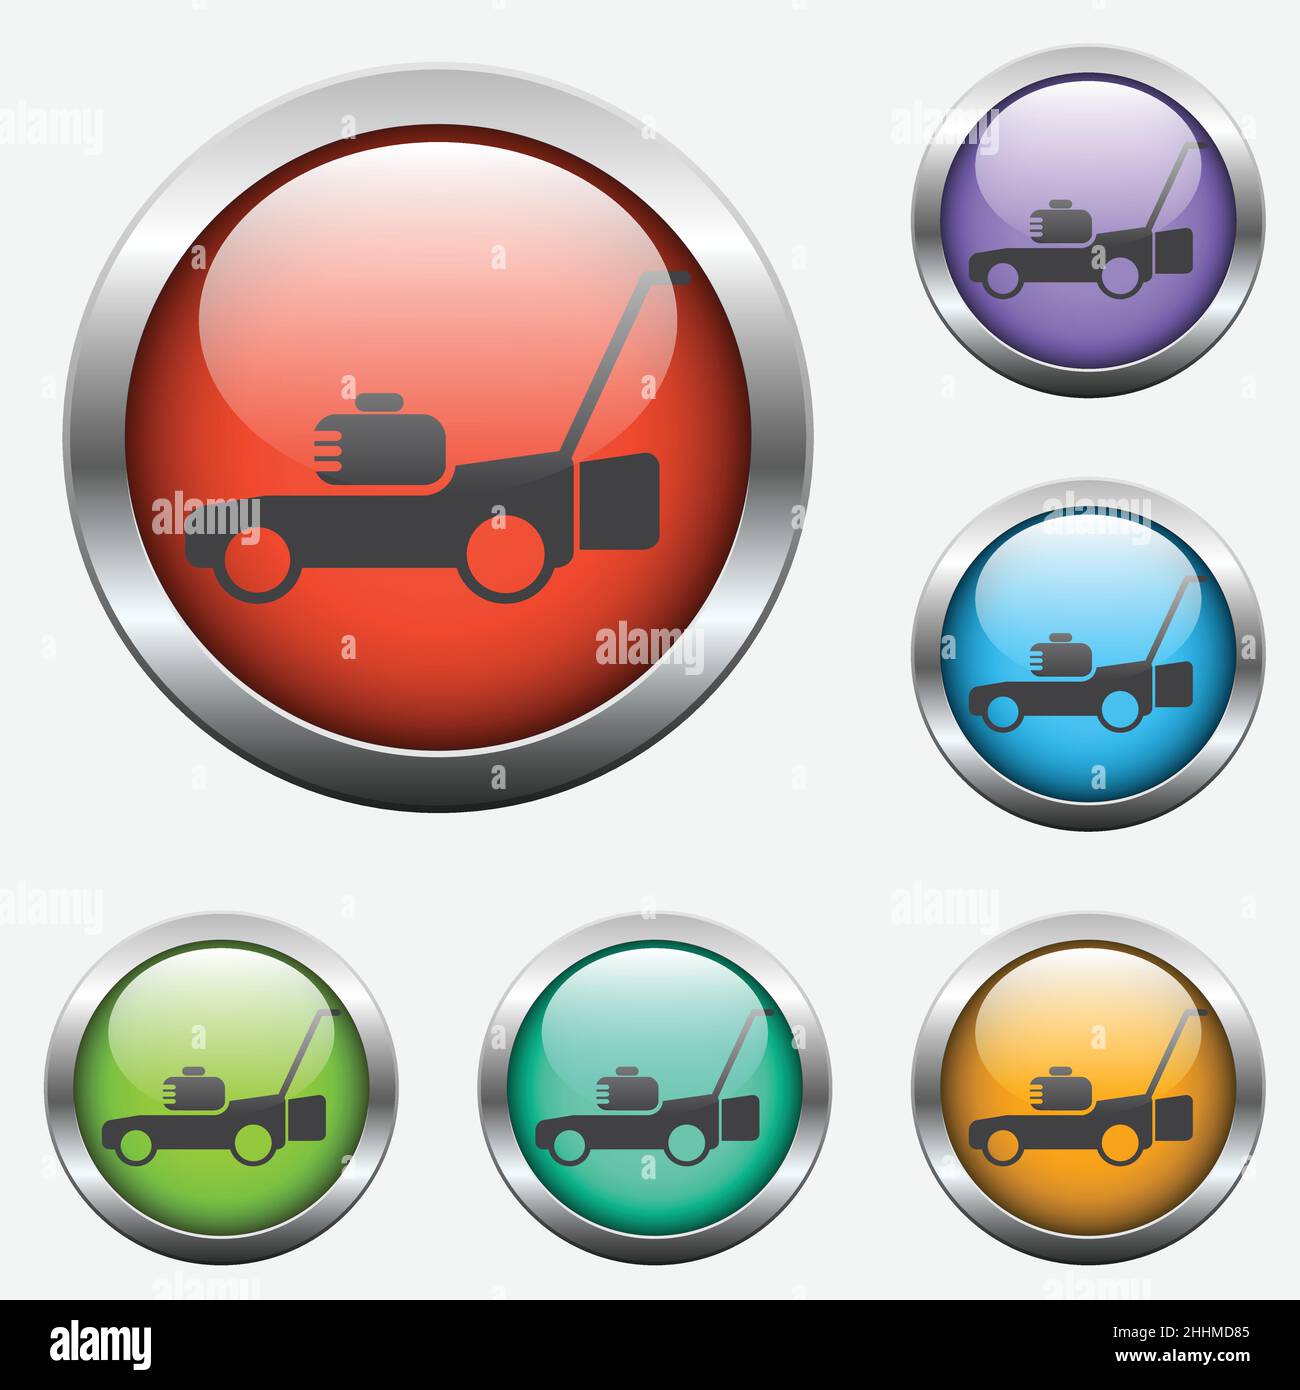 lawn mover vector icon on color glass buttons Stock Vector